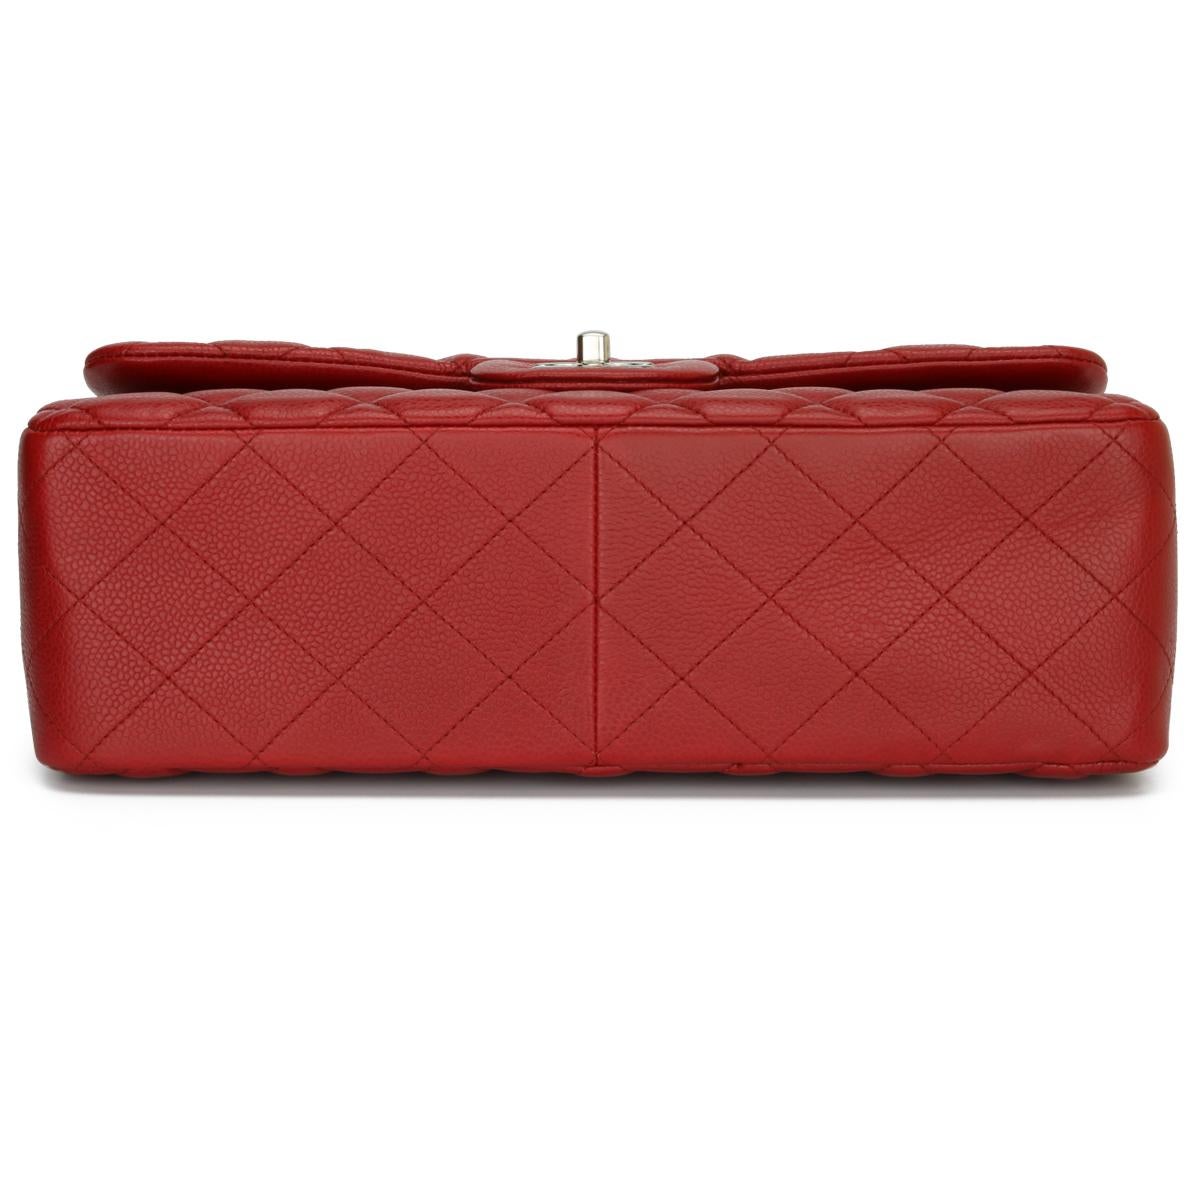 Women's or Men's CHANEL Double Flap Jumbo Bag Red Caviar with Silver Hardware 2010